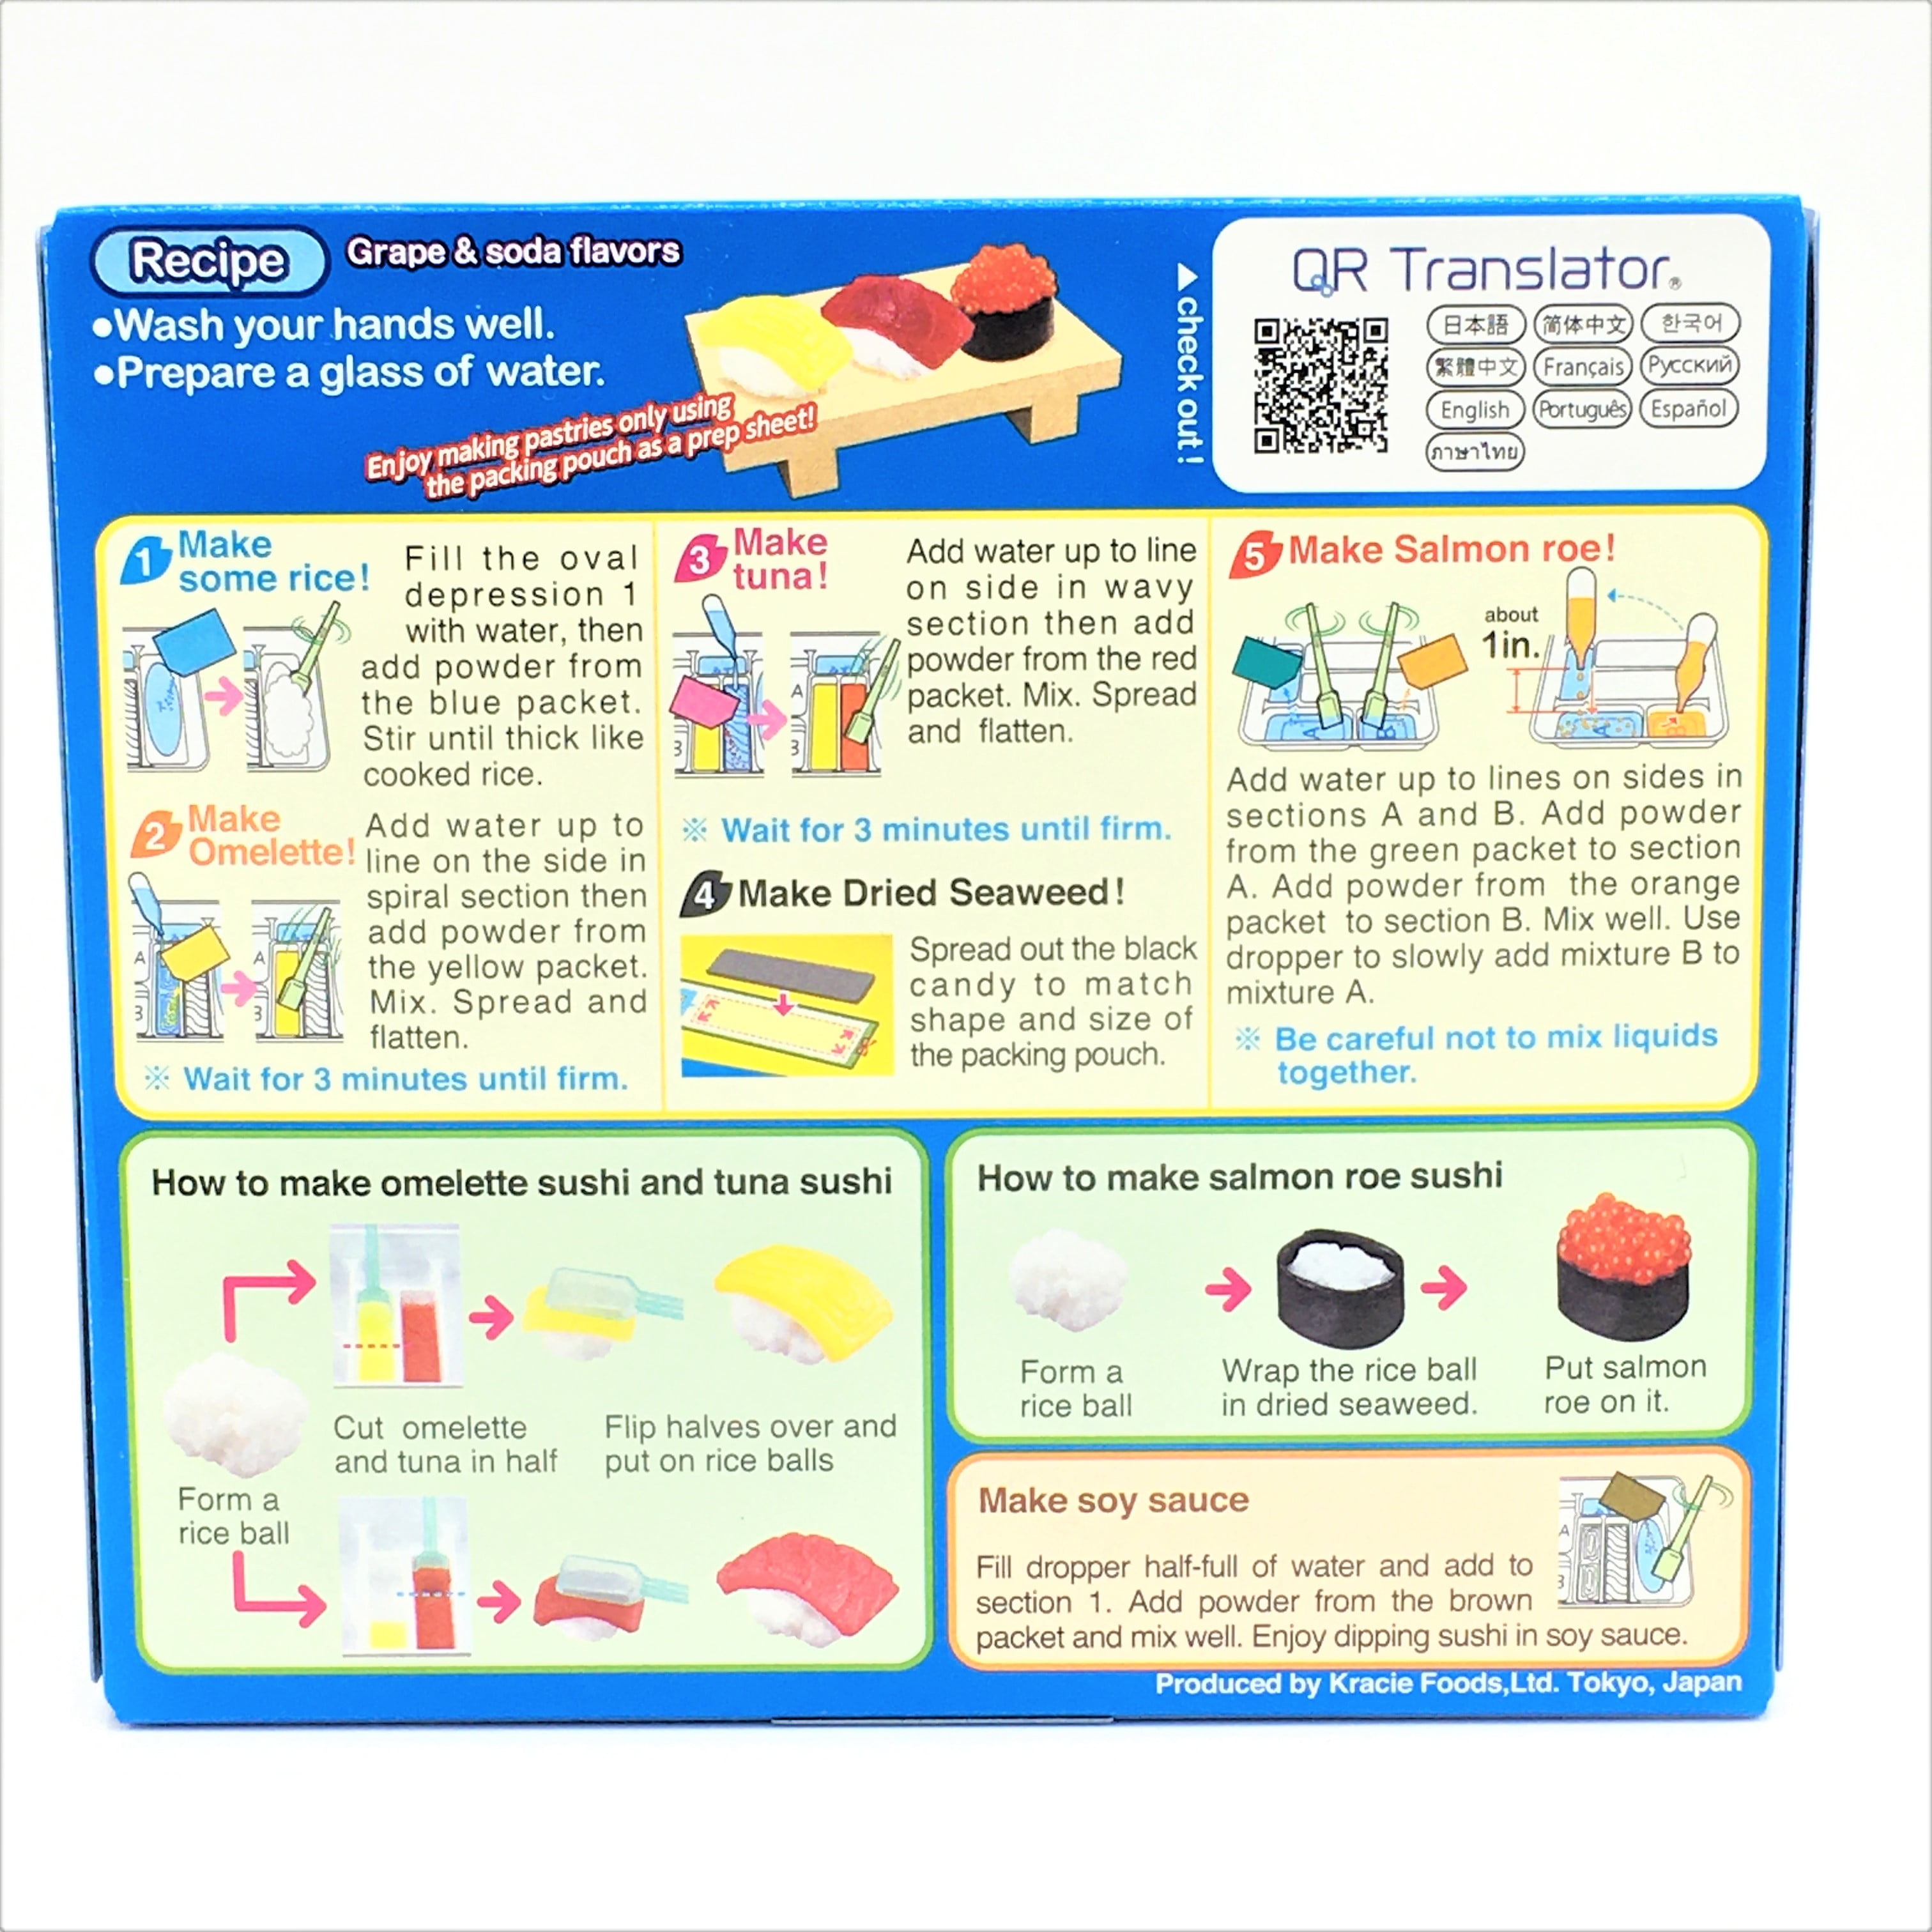 Kracie Popin Cookin DIY Candy Making Kit with English Instructions,  Assorted Variety Set, Multiple Packs Tanoshii